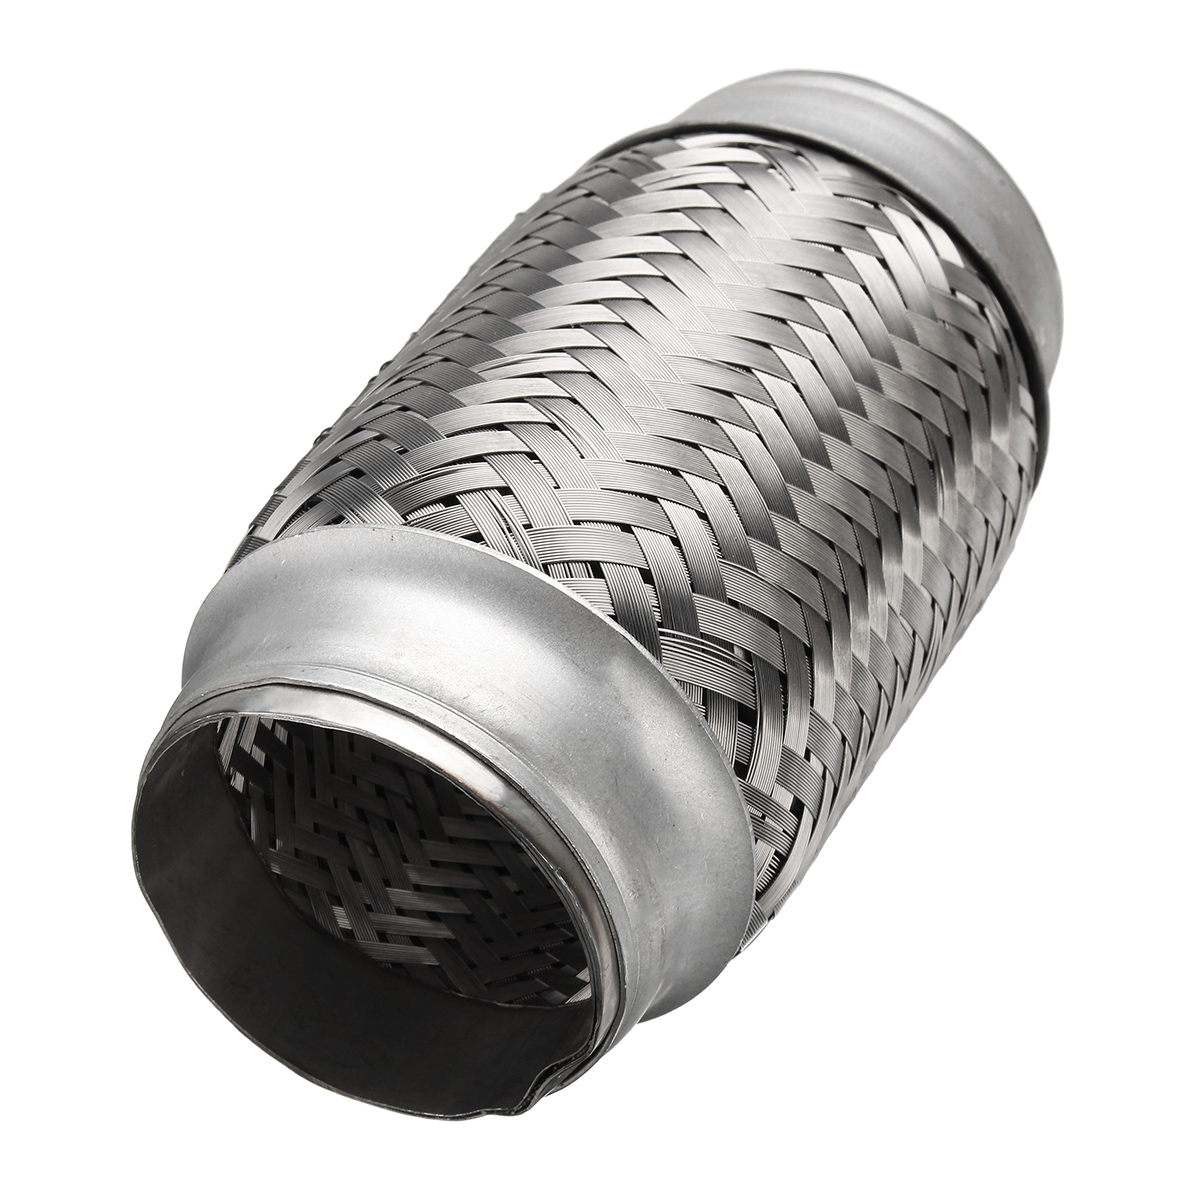 63.5mm x 152mm Double-layer Car Modification Woven Exhaust Muffler Stainless Steel Exhaust Pipe